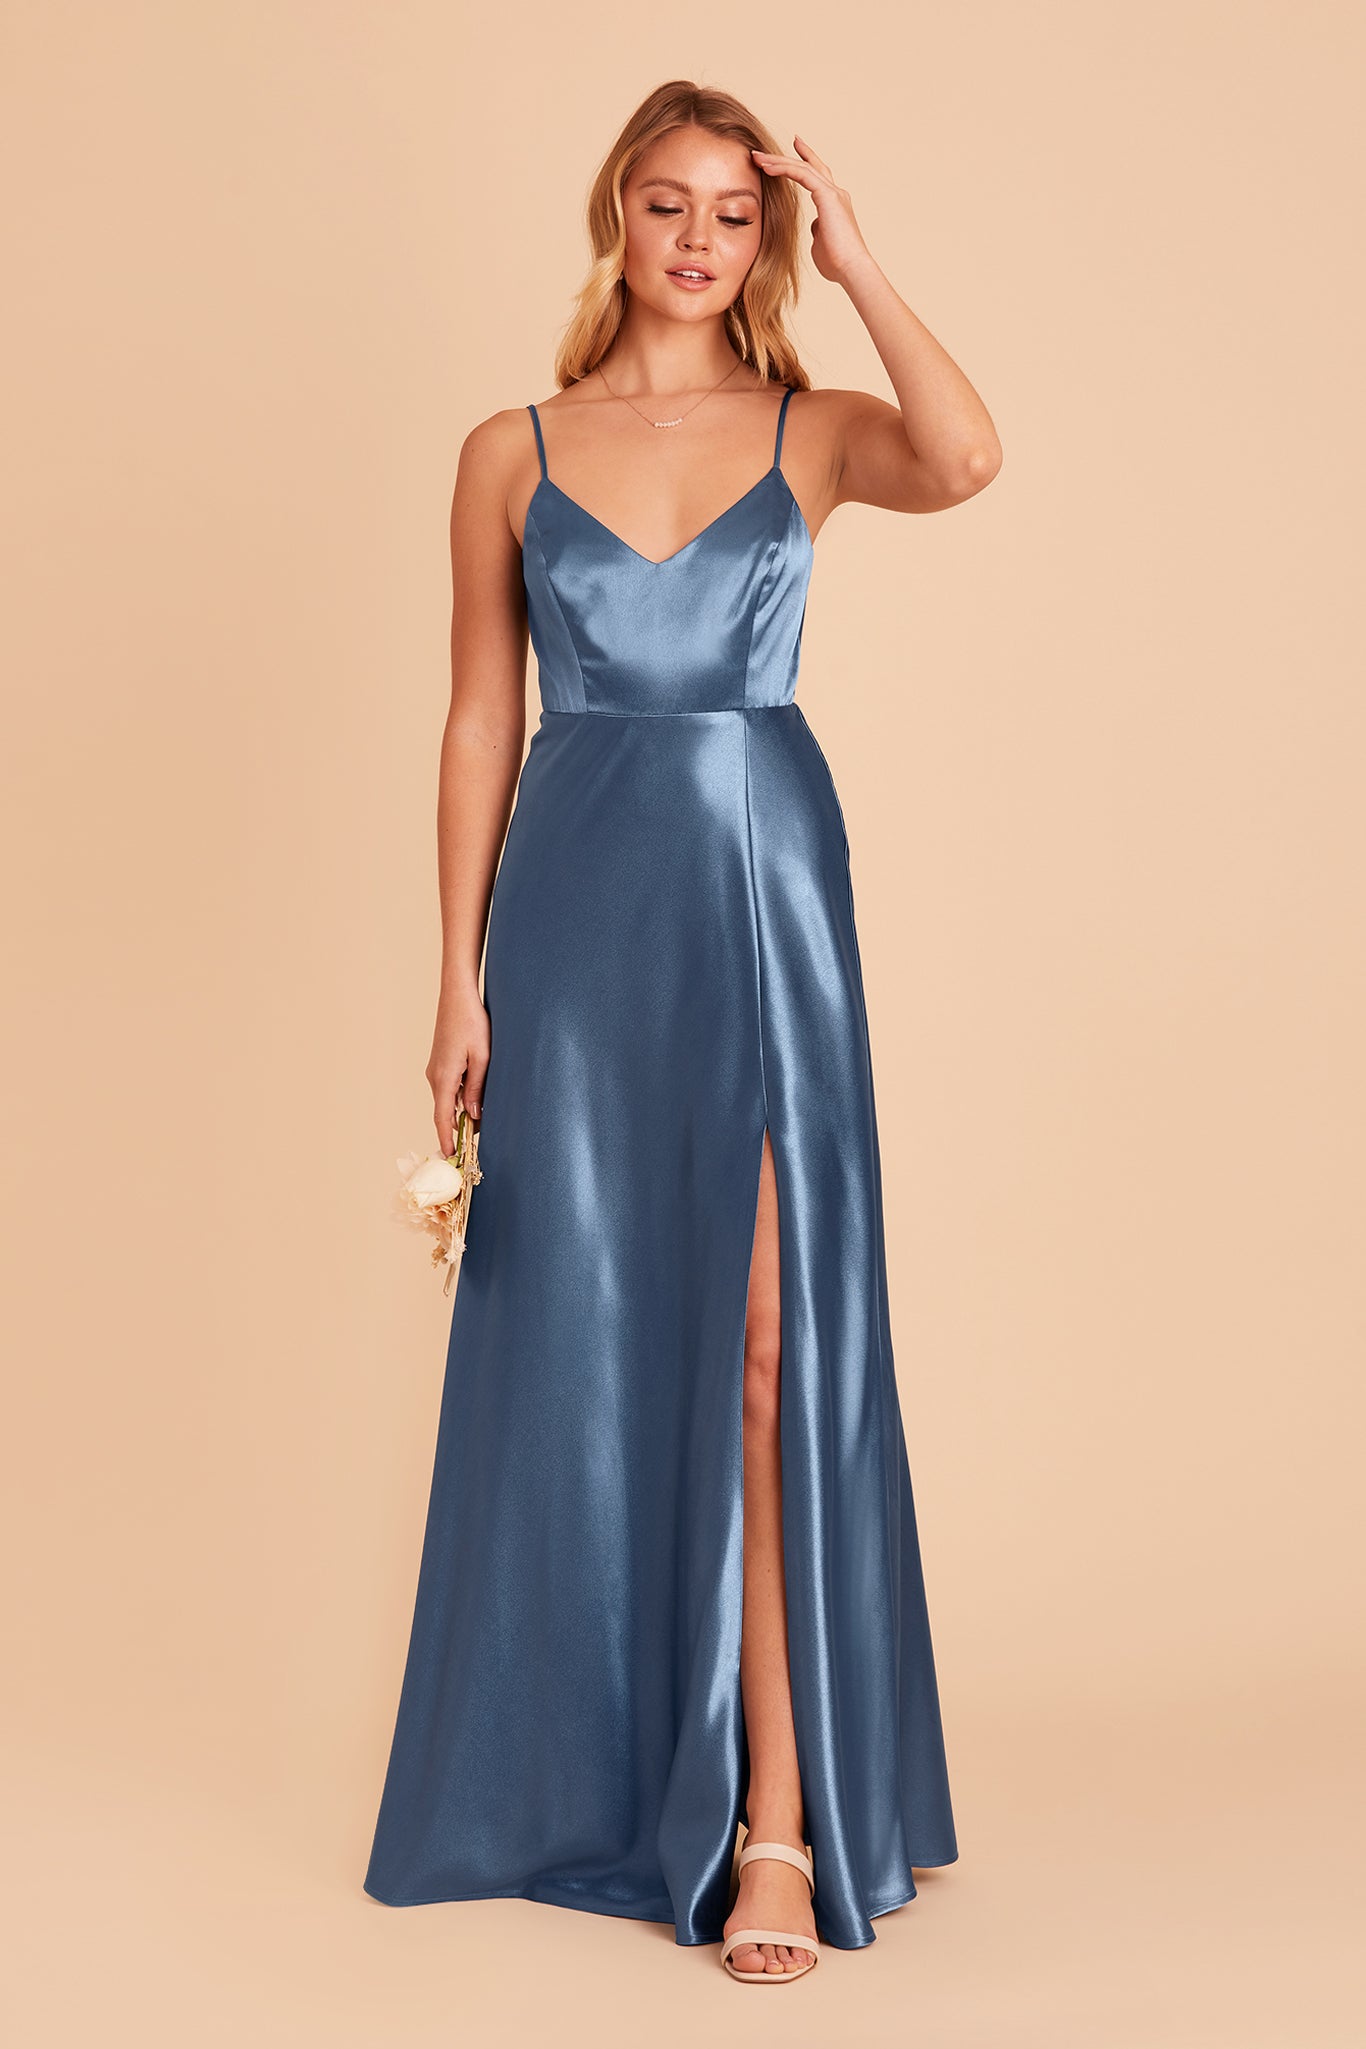 Jay bridesmaid dress with slit in twilight satin by Birdy Grey, front view